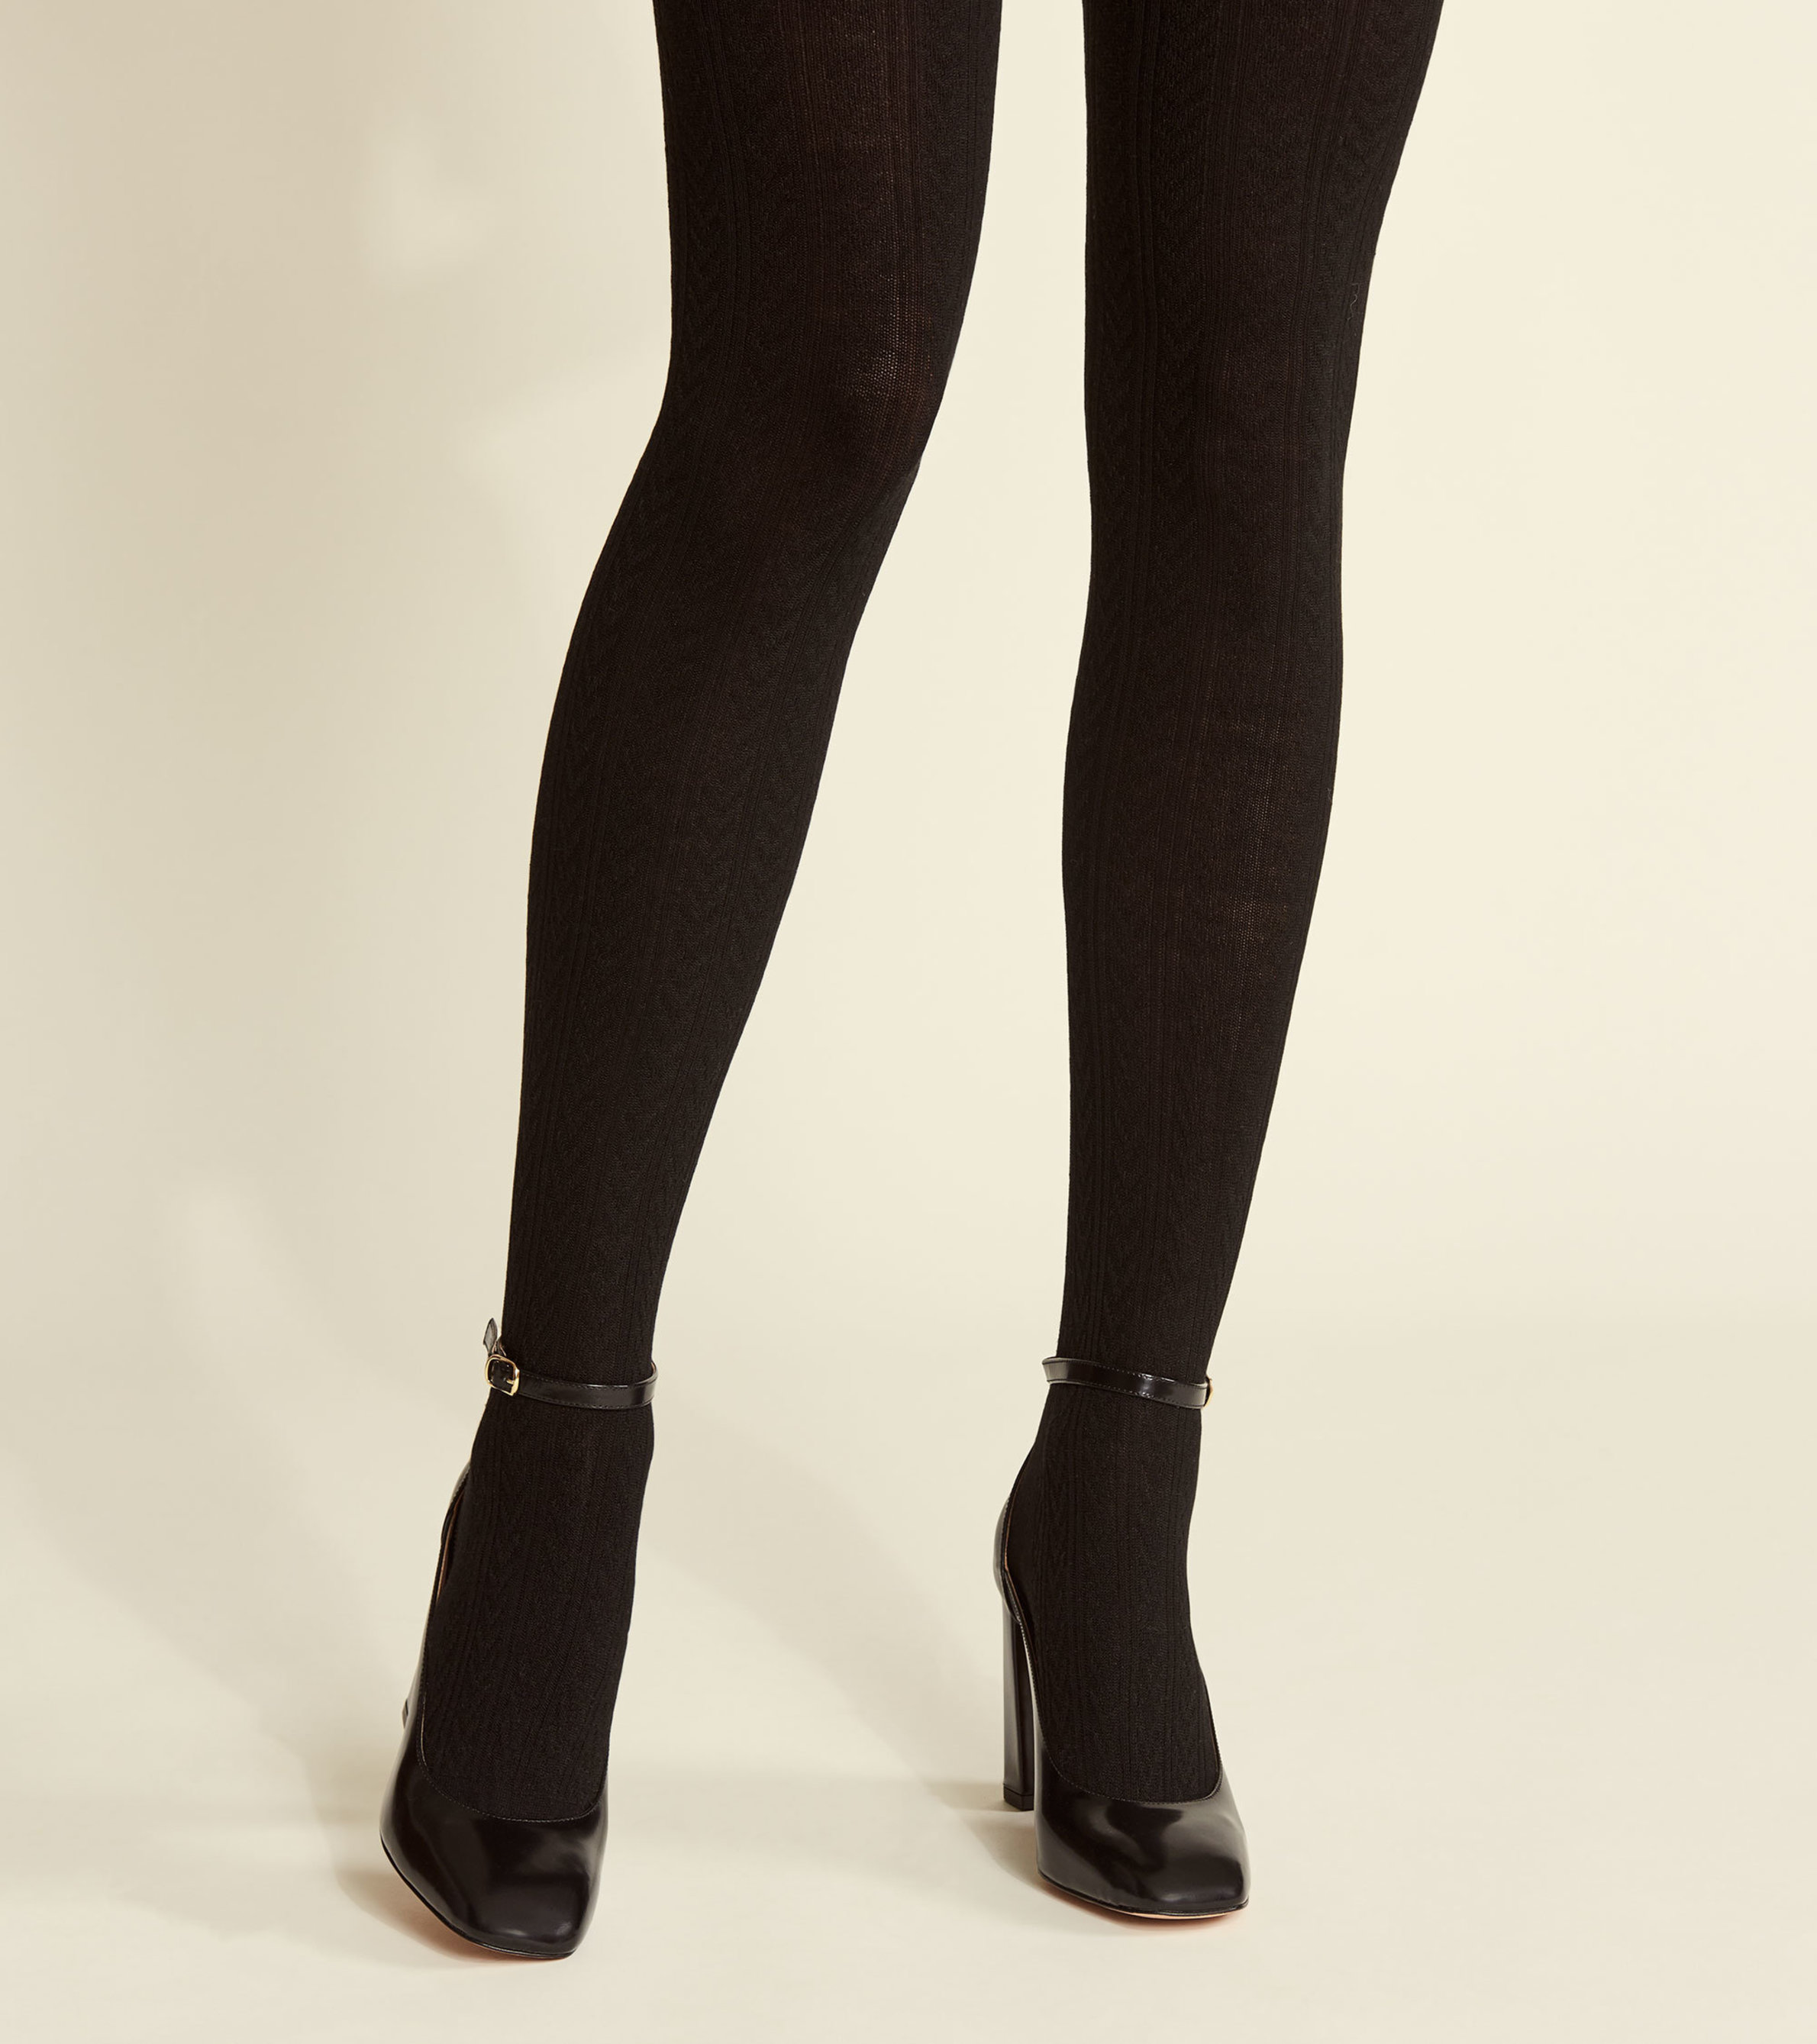 https://cdn.hatley.com/product_images/cable-knit-tights-black/F19BBL1335_jpg/pdp_zoom.jpg?c=1600359180&locale=en